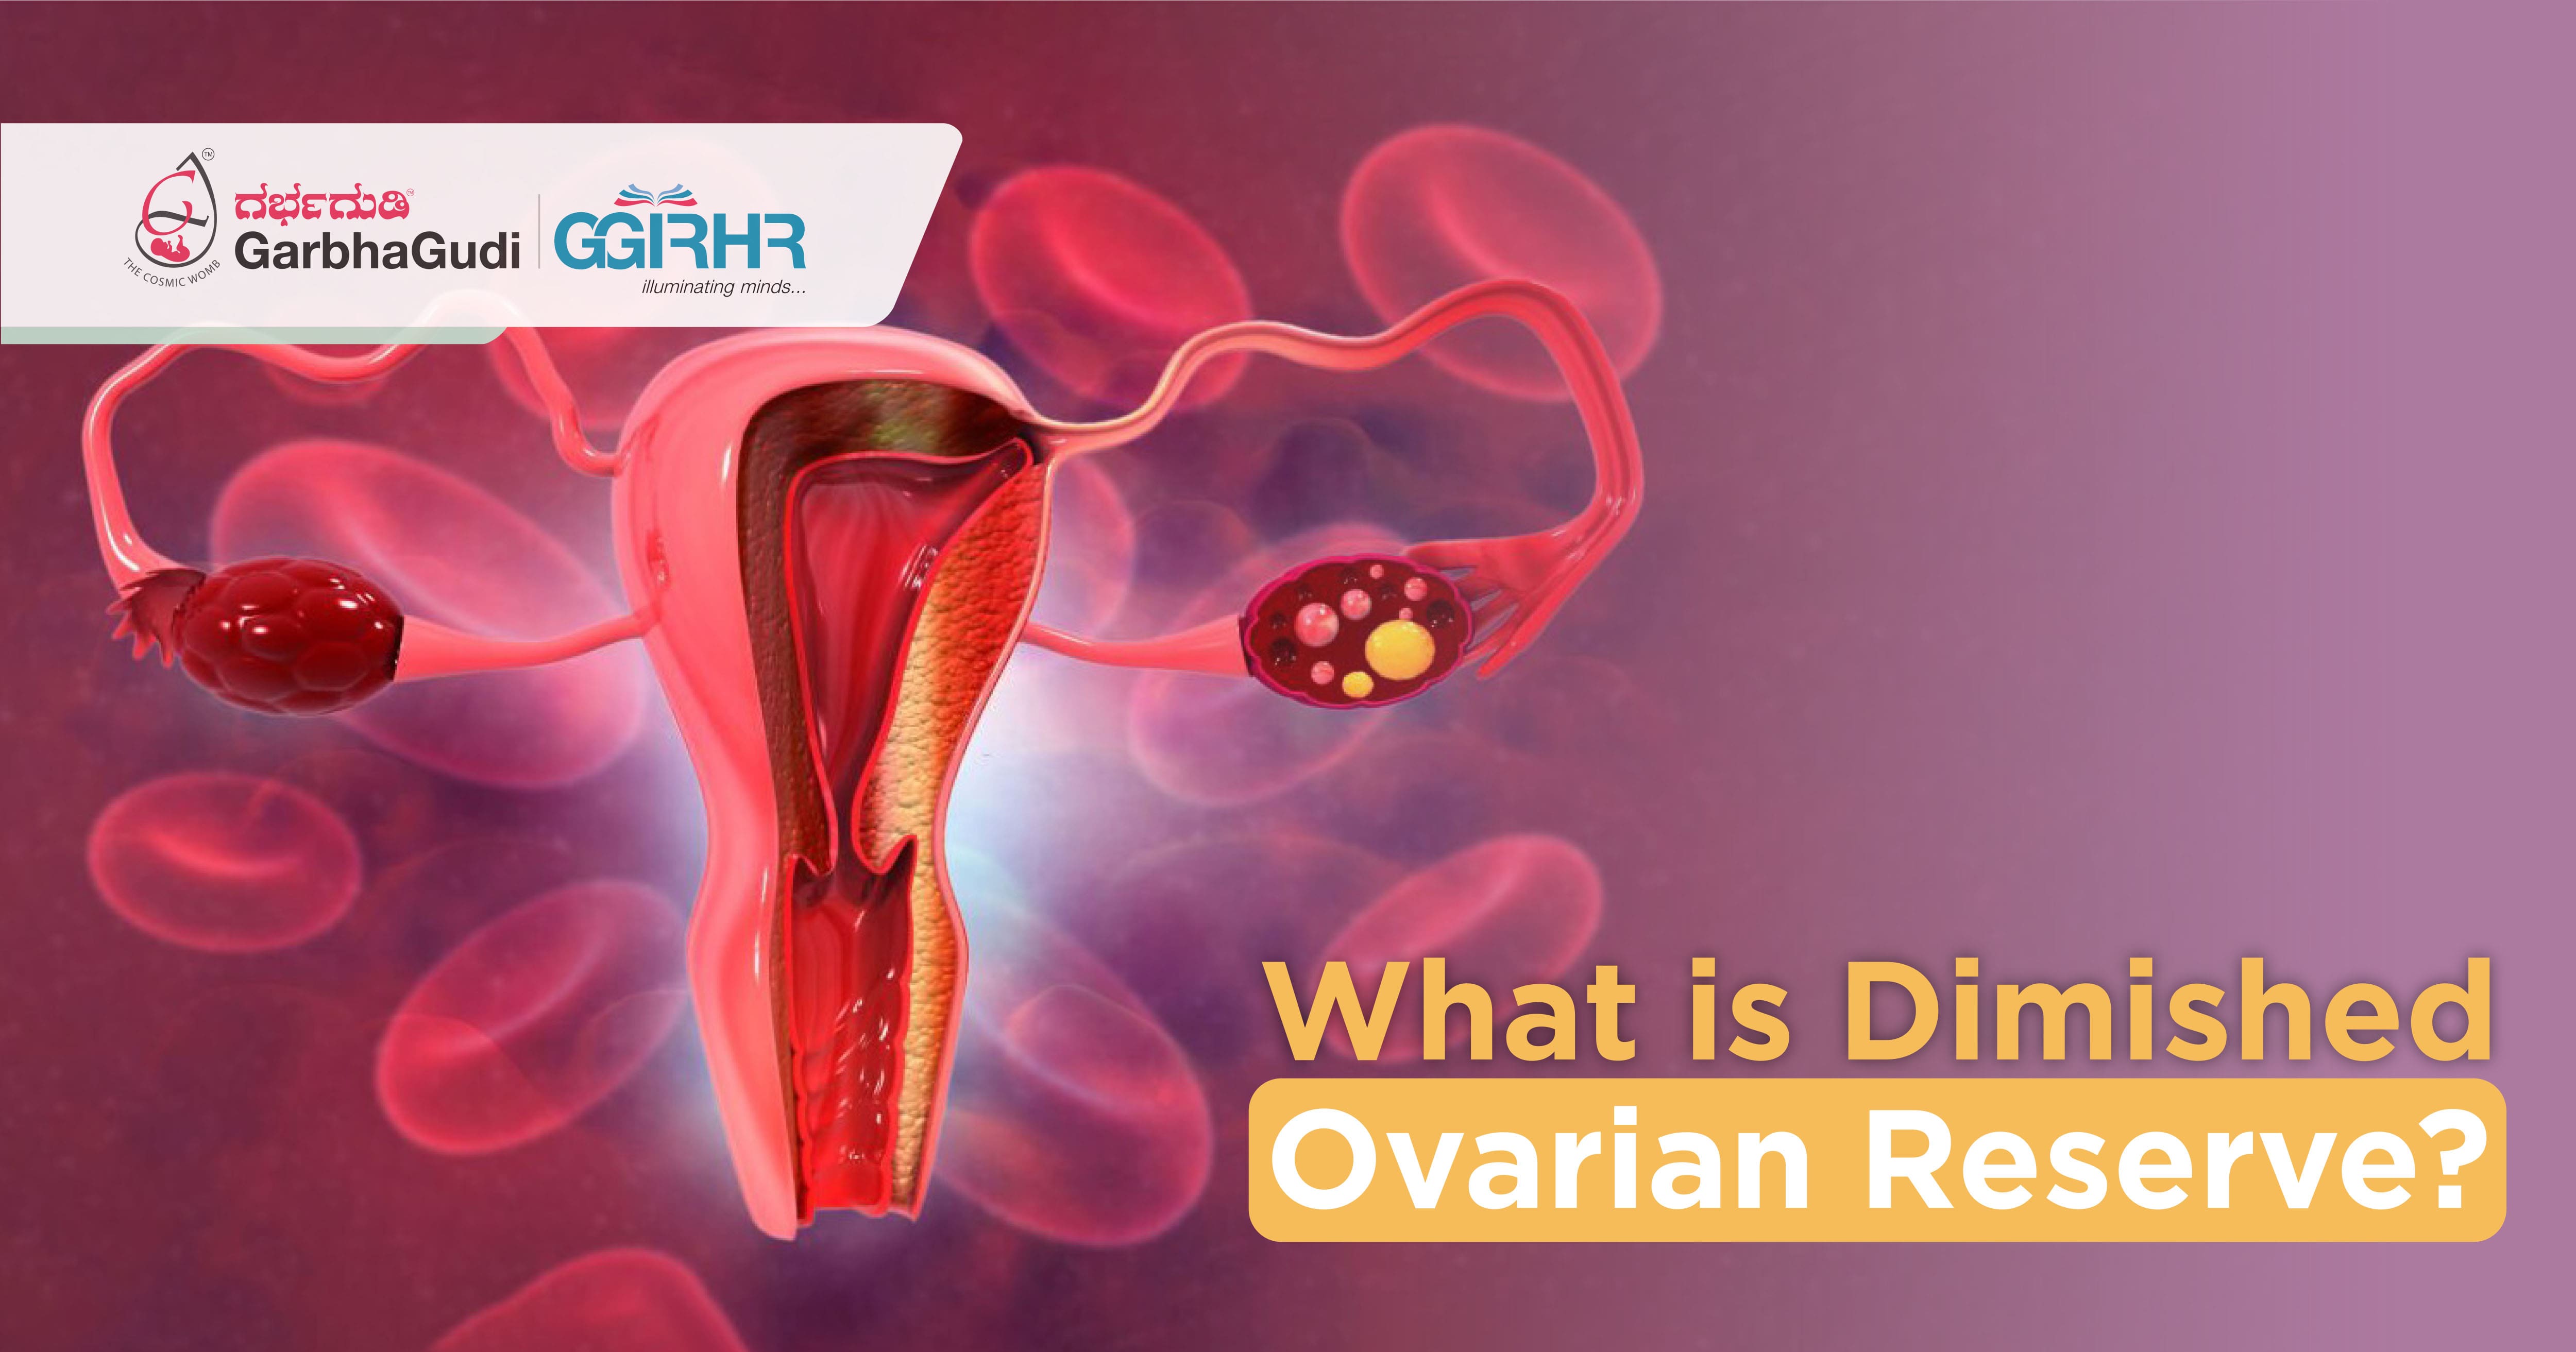 What Is Diminished Ovarian Reserve?